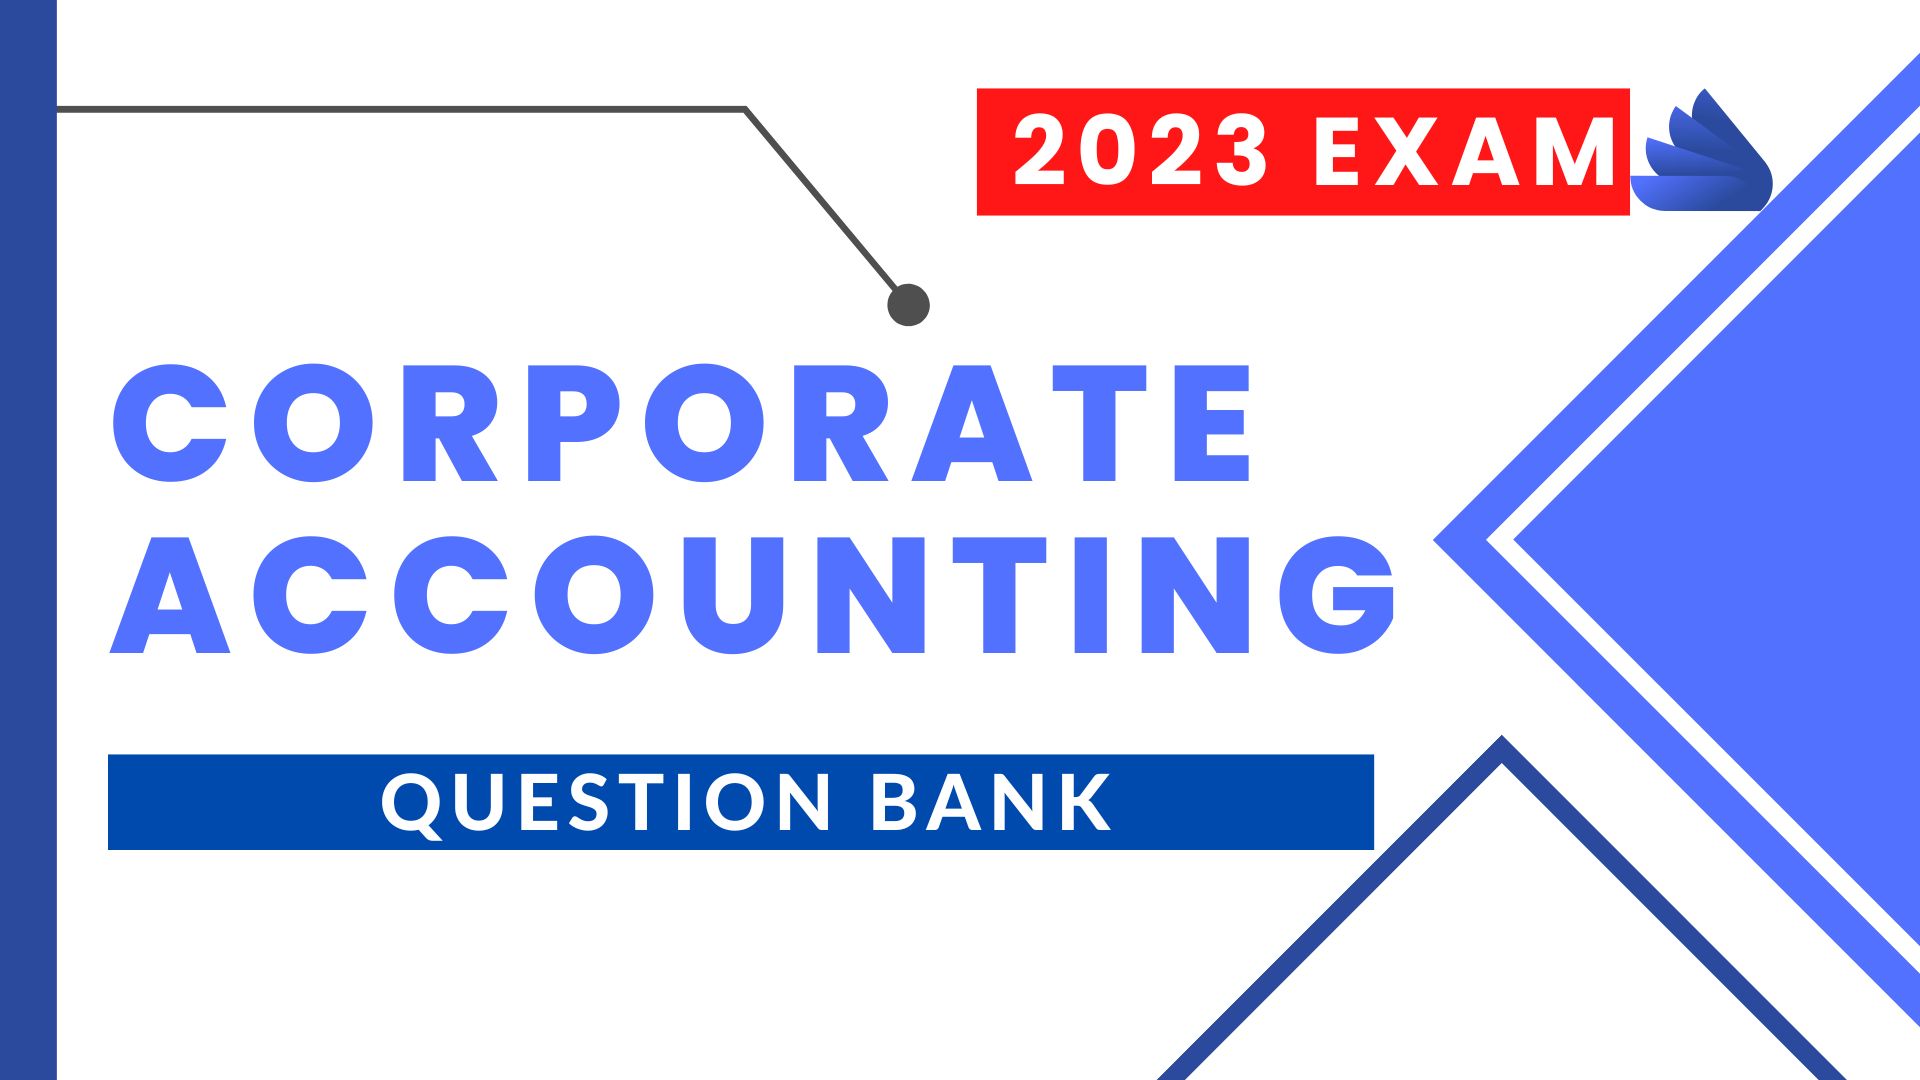 accounts of banking companies question bank